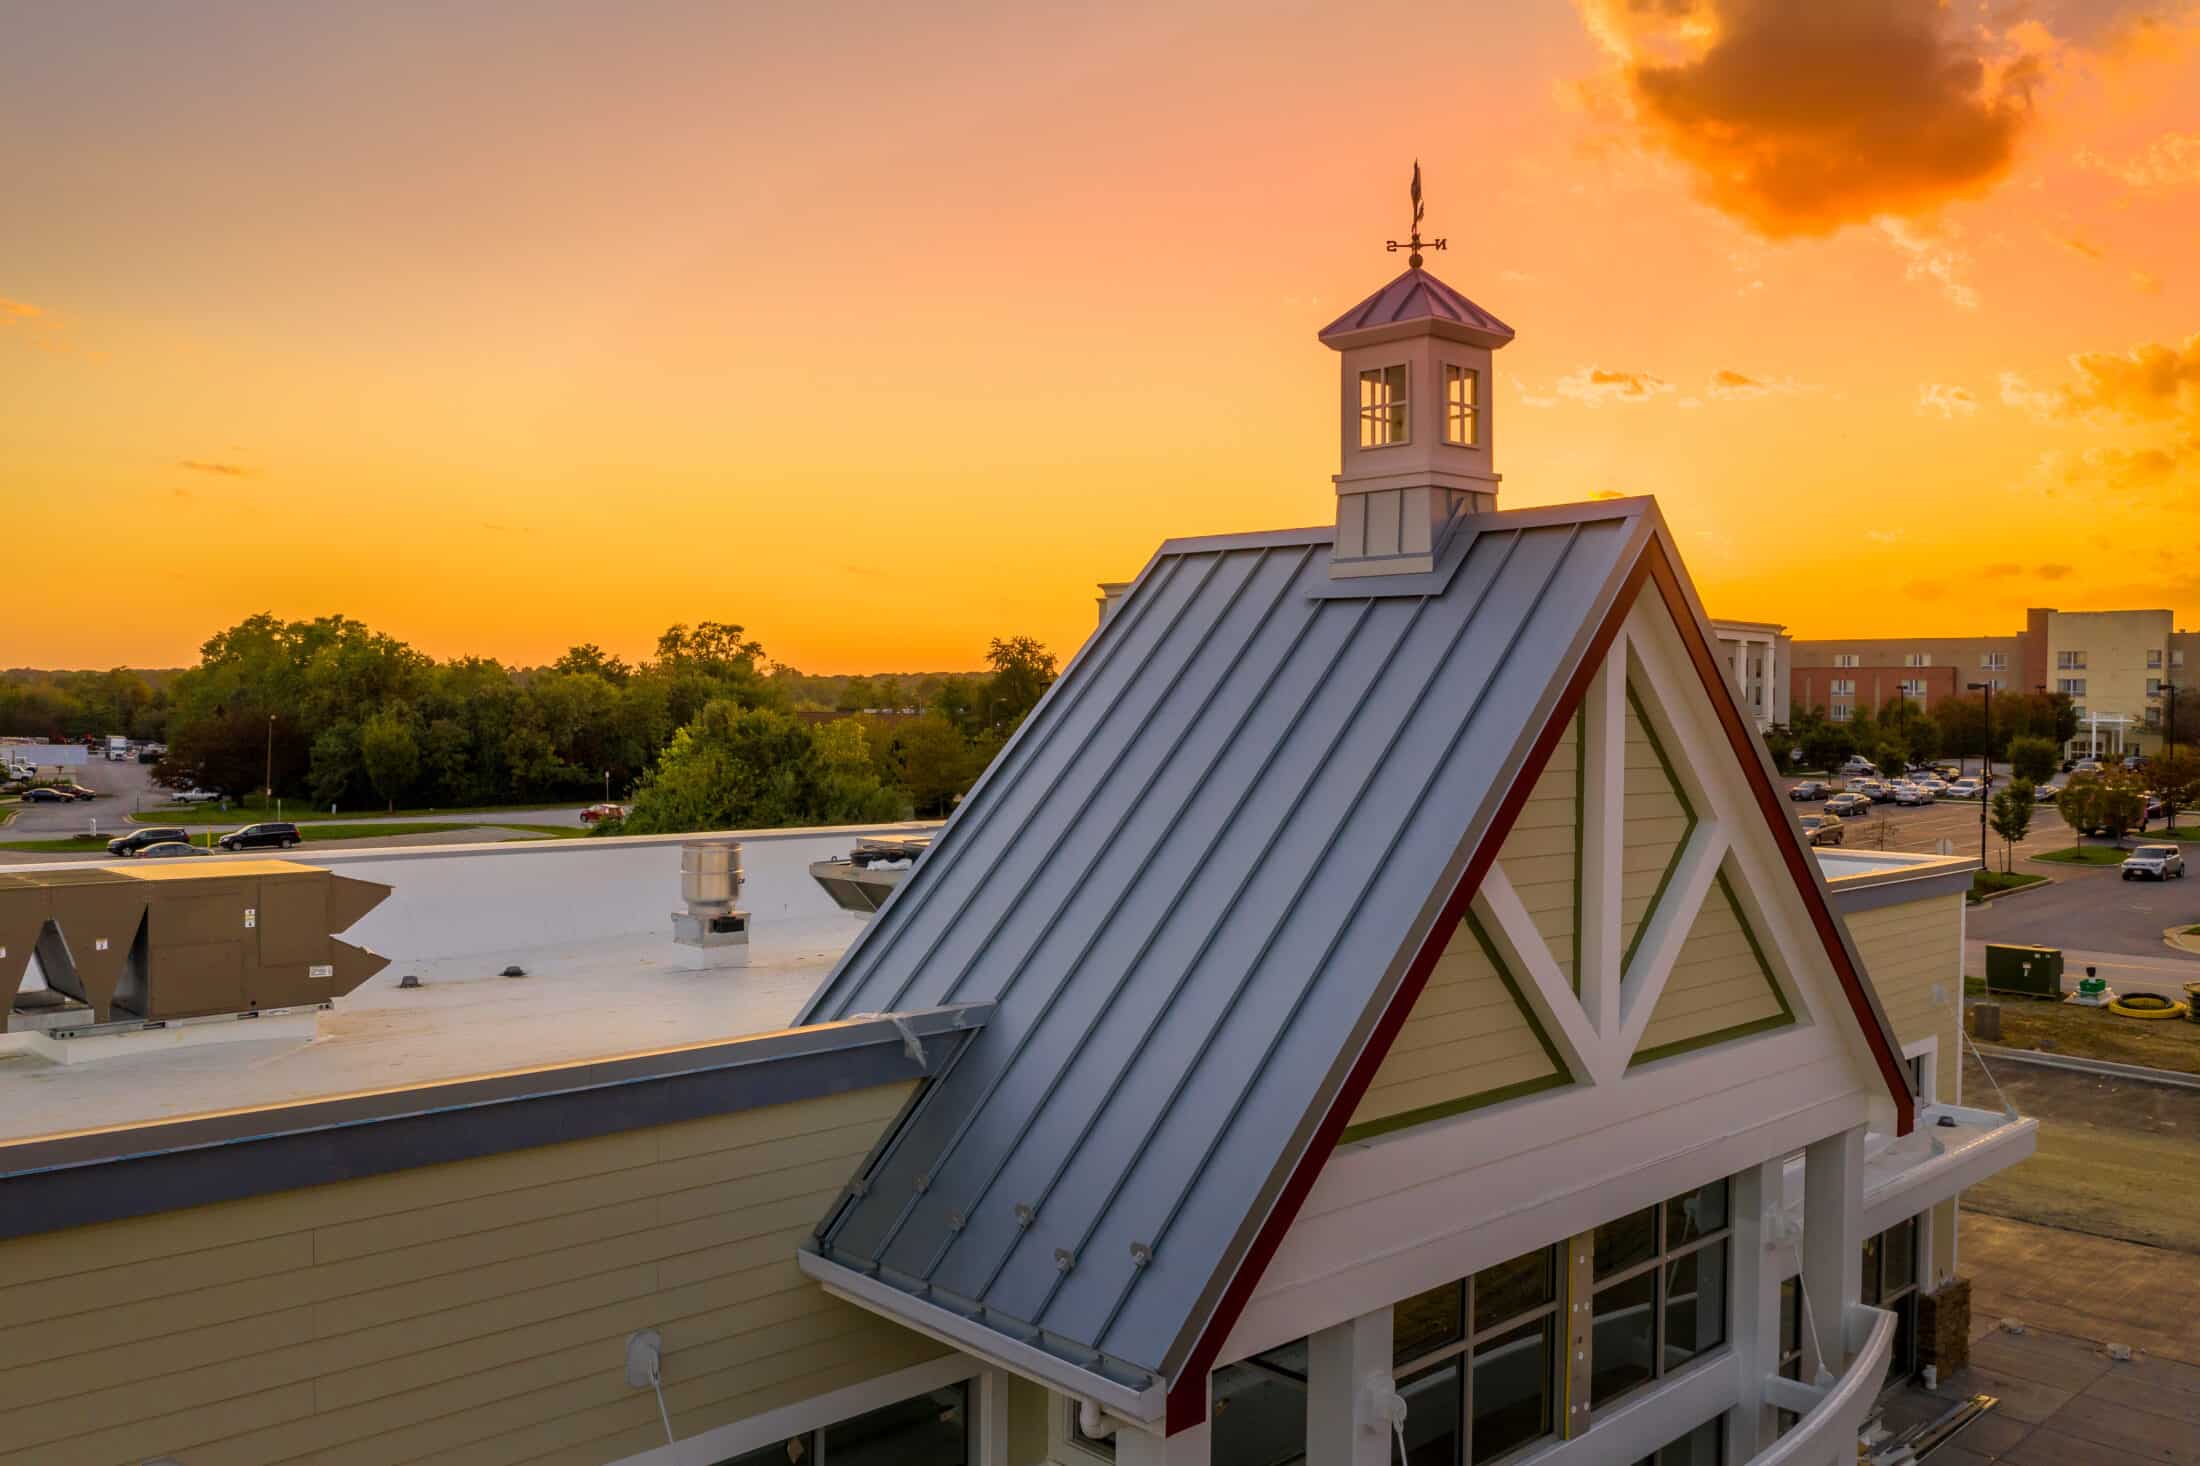 Weather vane cupola on a gable roof with colorful sunset sky